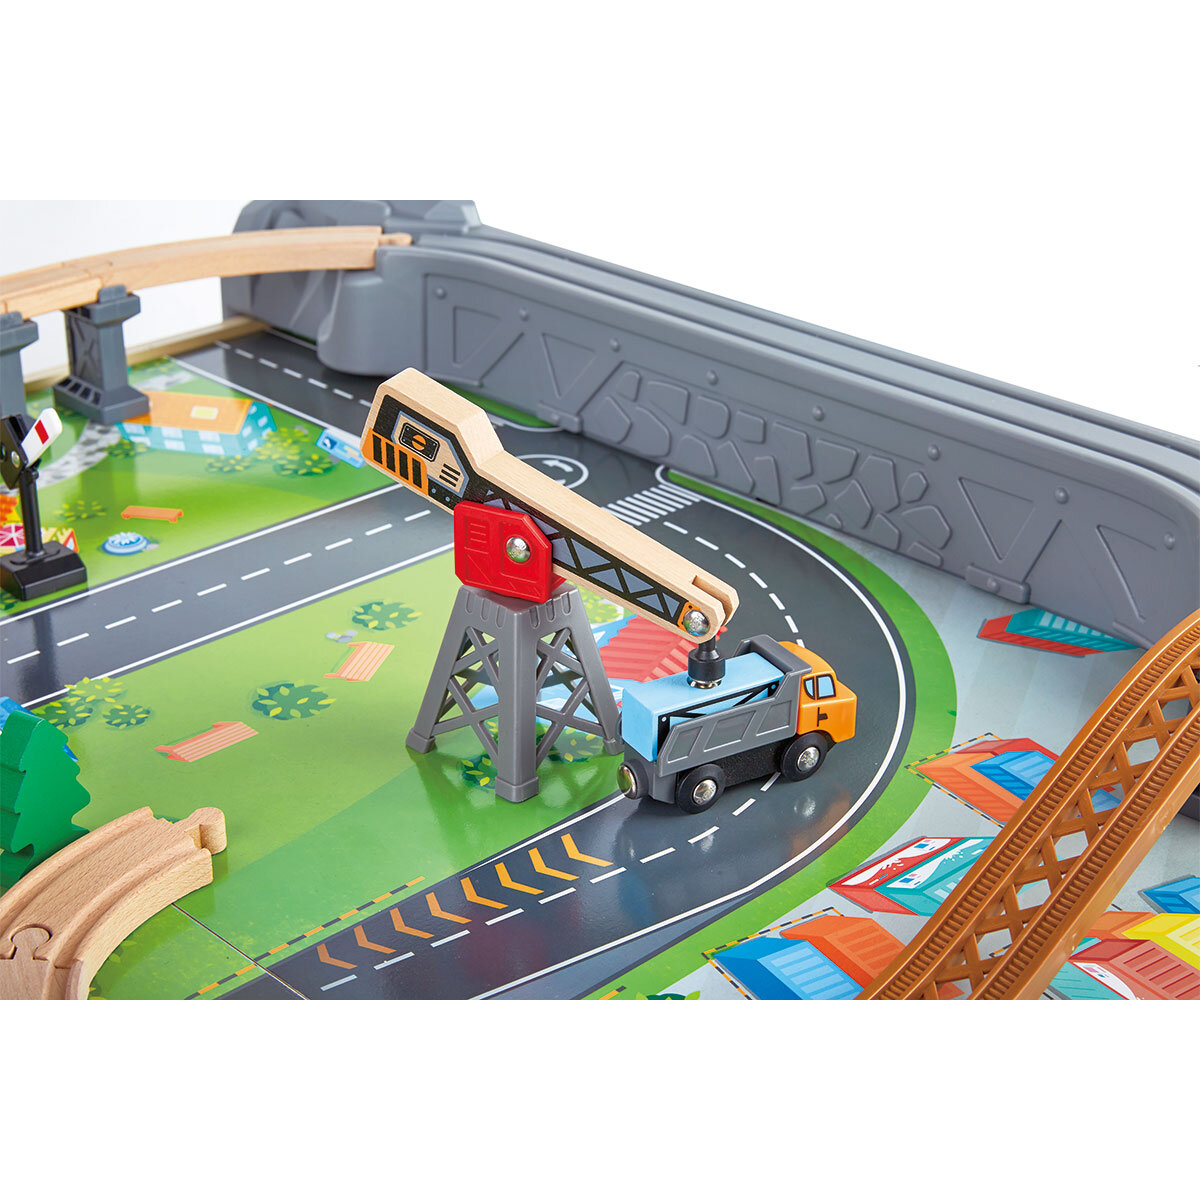 Buy Hape Railway Play Table Feature2 Image at Costco.co.uk